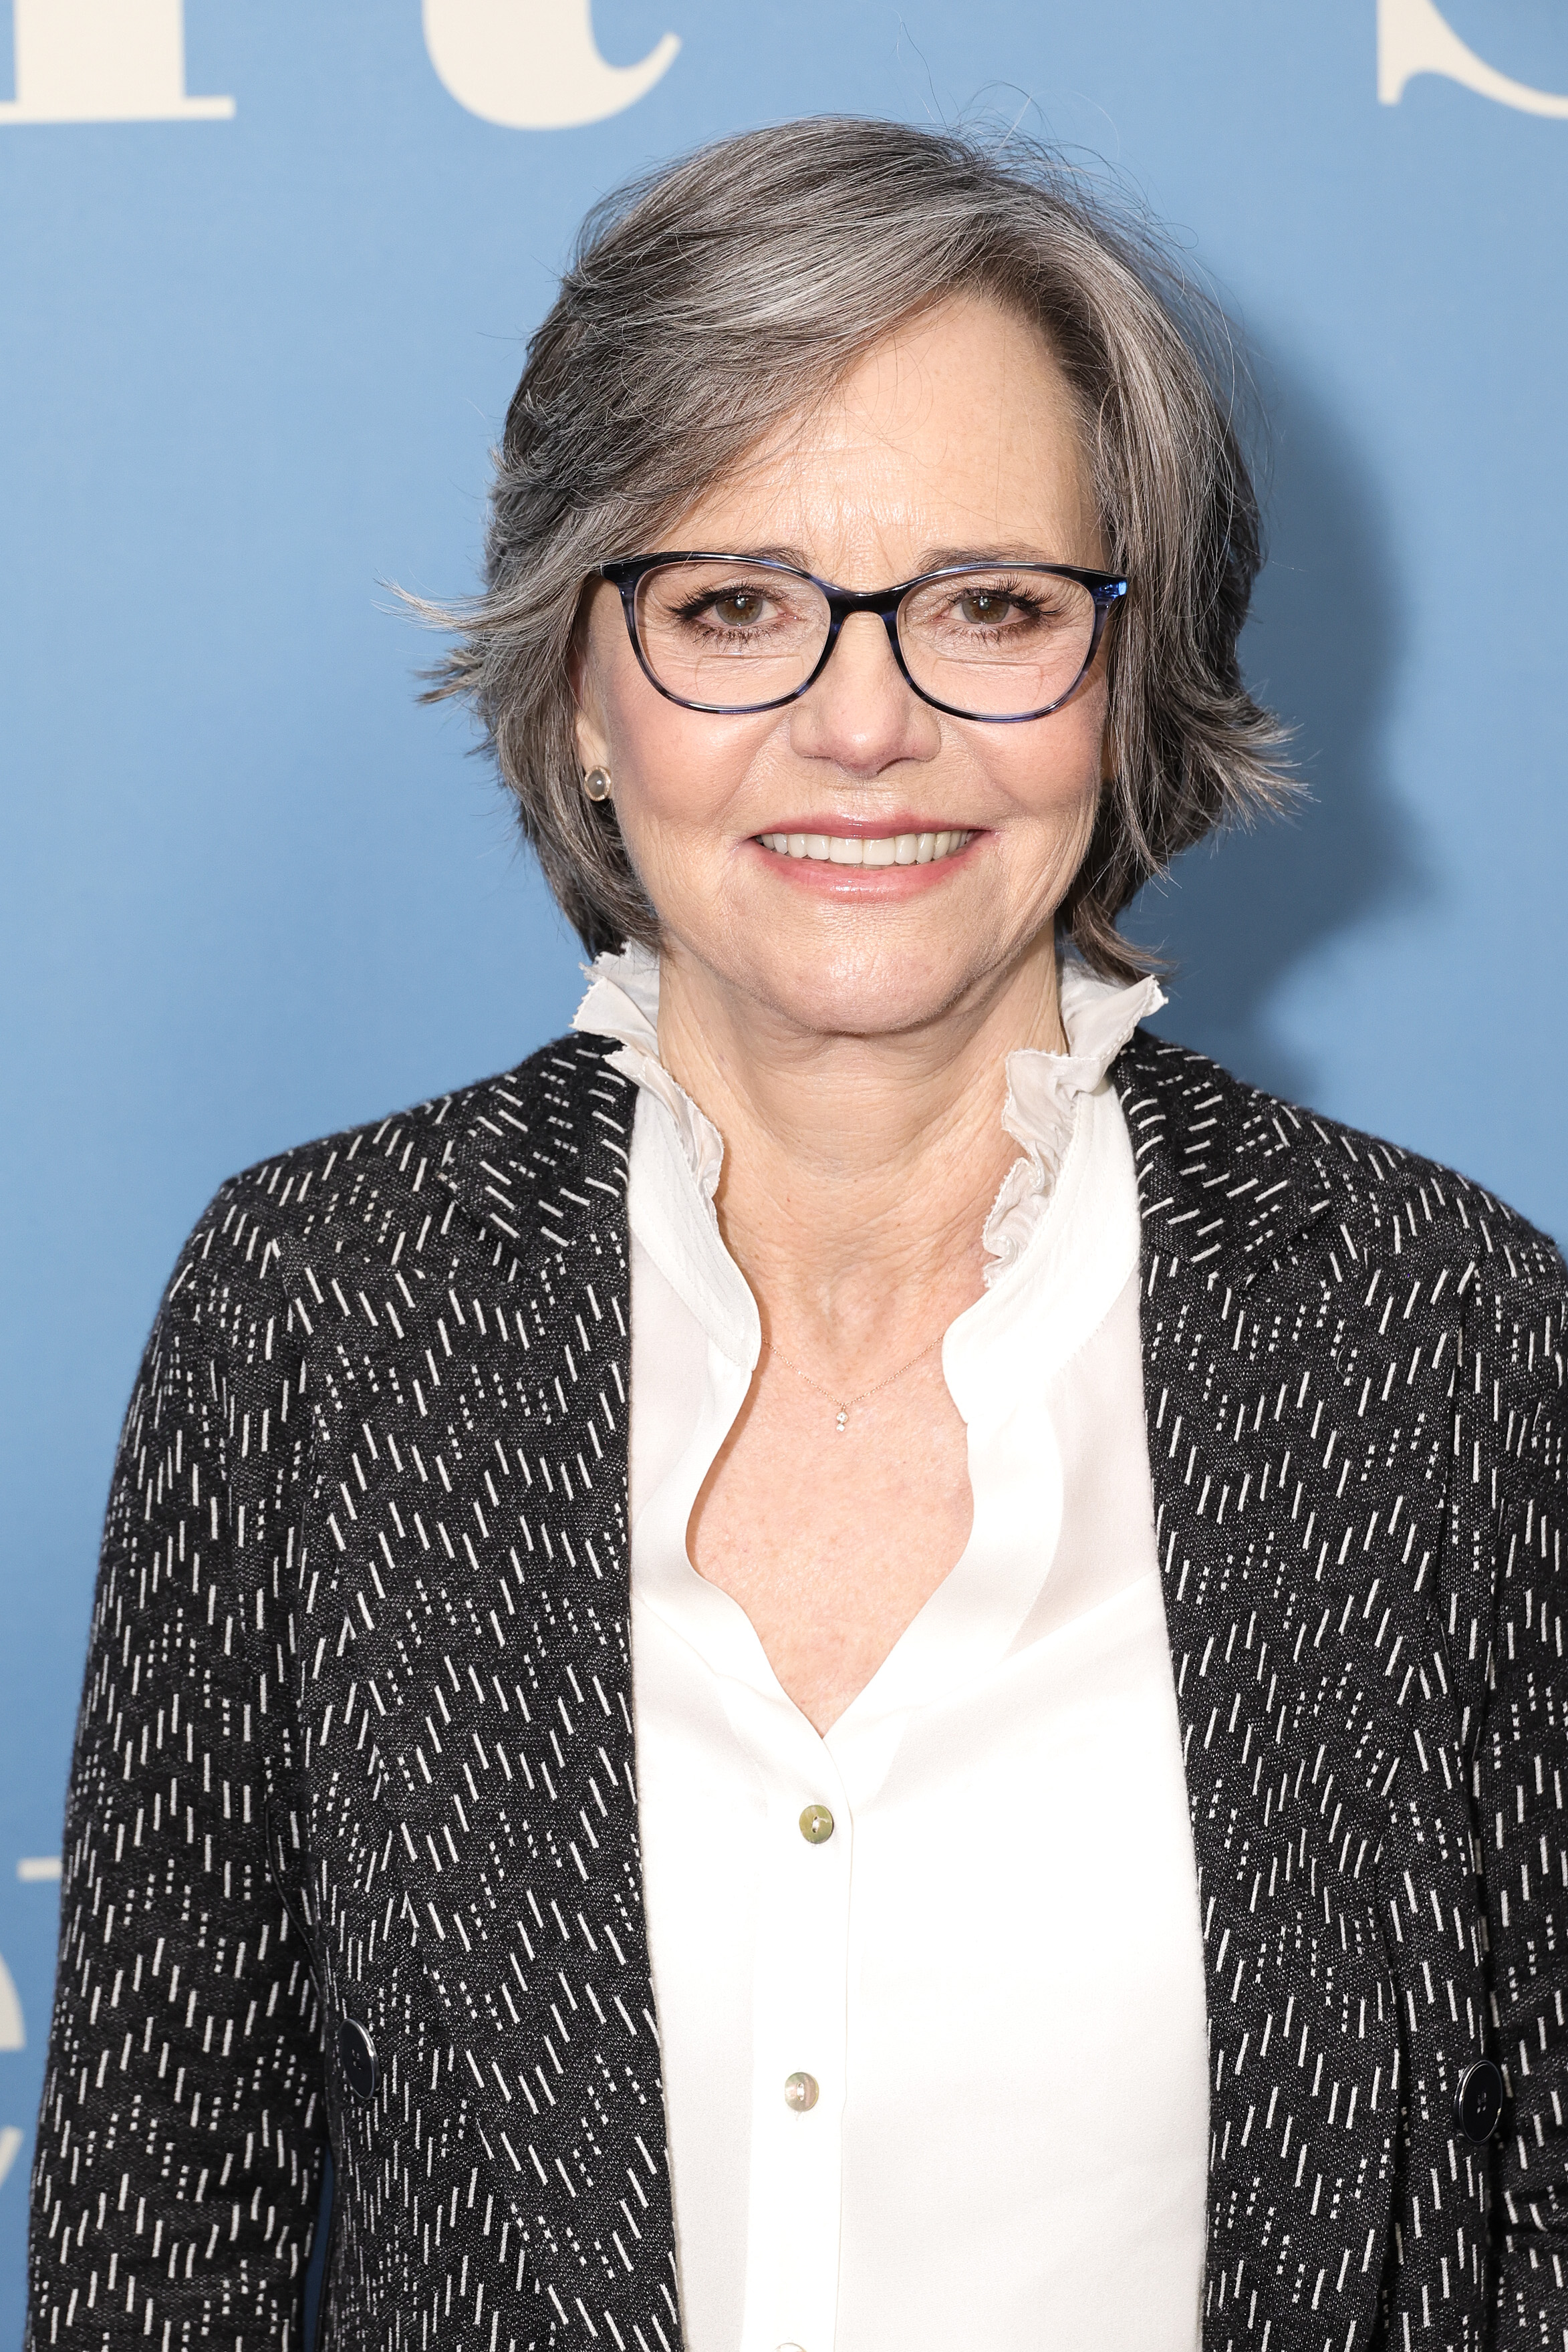 Sally Field at the "Spoiler Alert" New York premiere on November 29, 2022, in New York City | Source: Getty Images